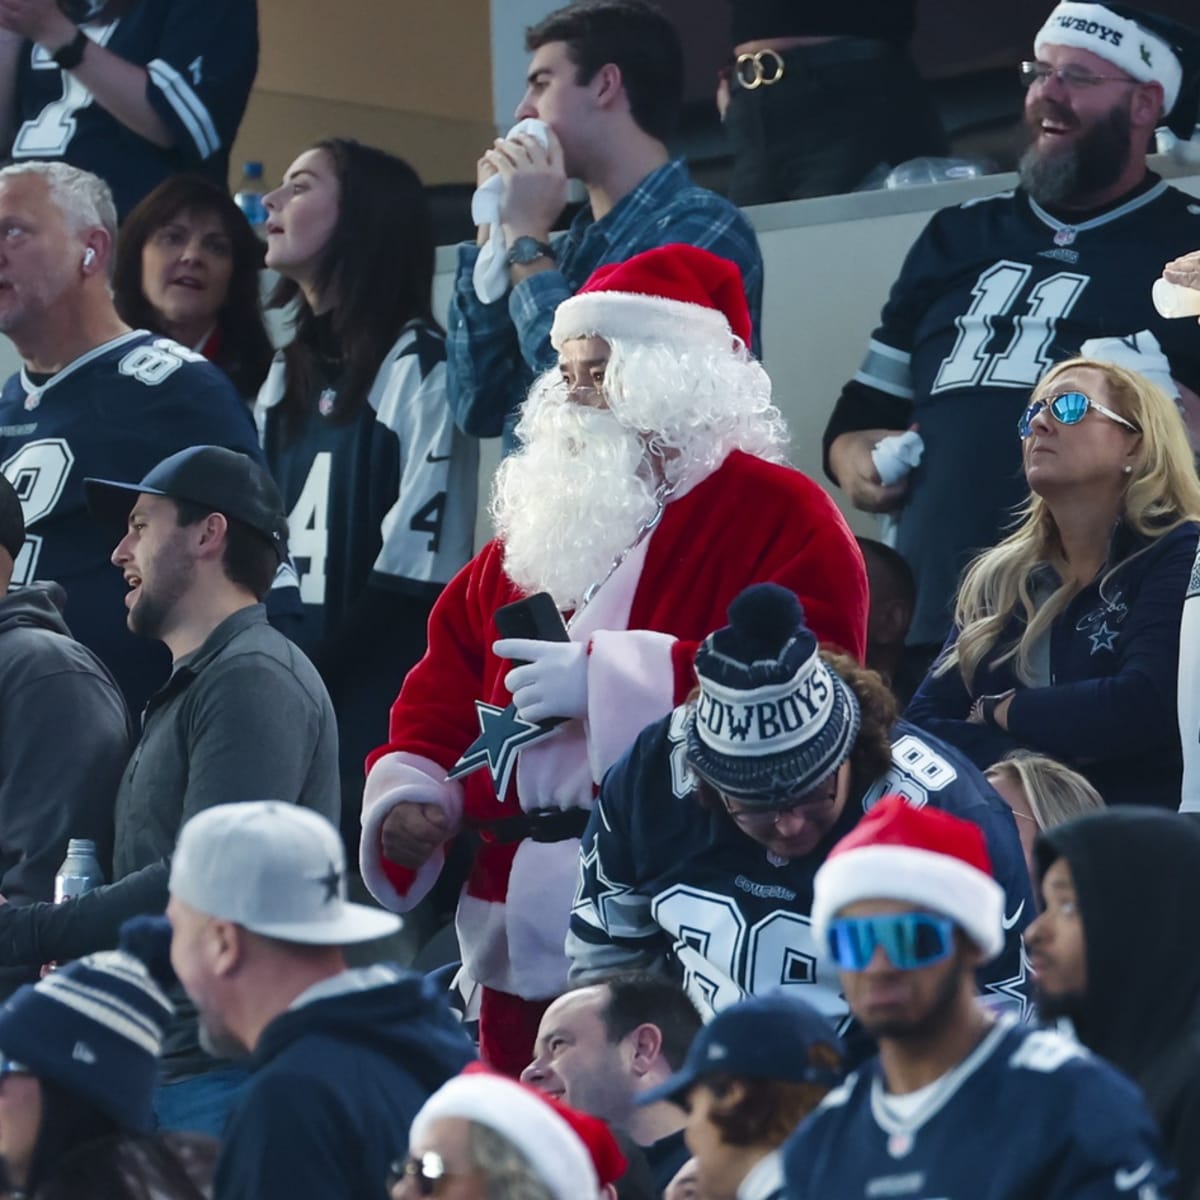 Frank Olivo, 66, substitute Santa hit with snowballs at Eagles game